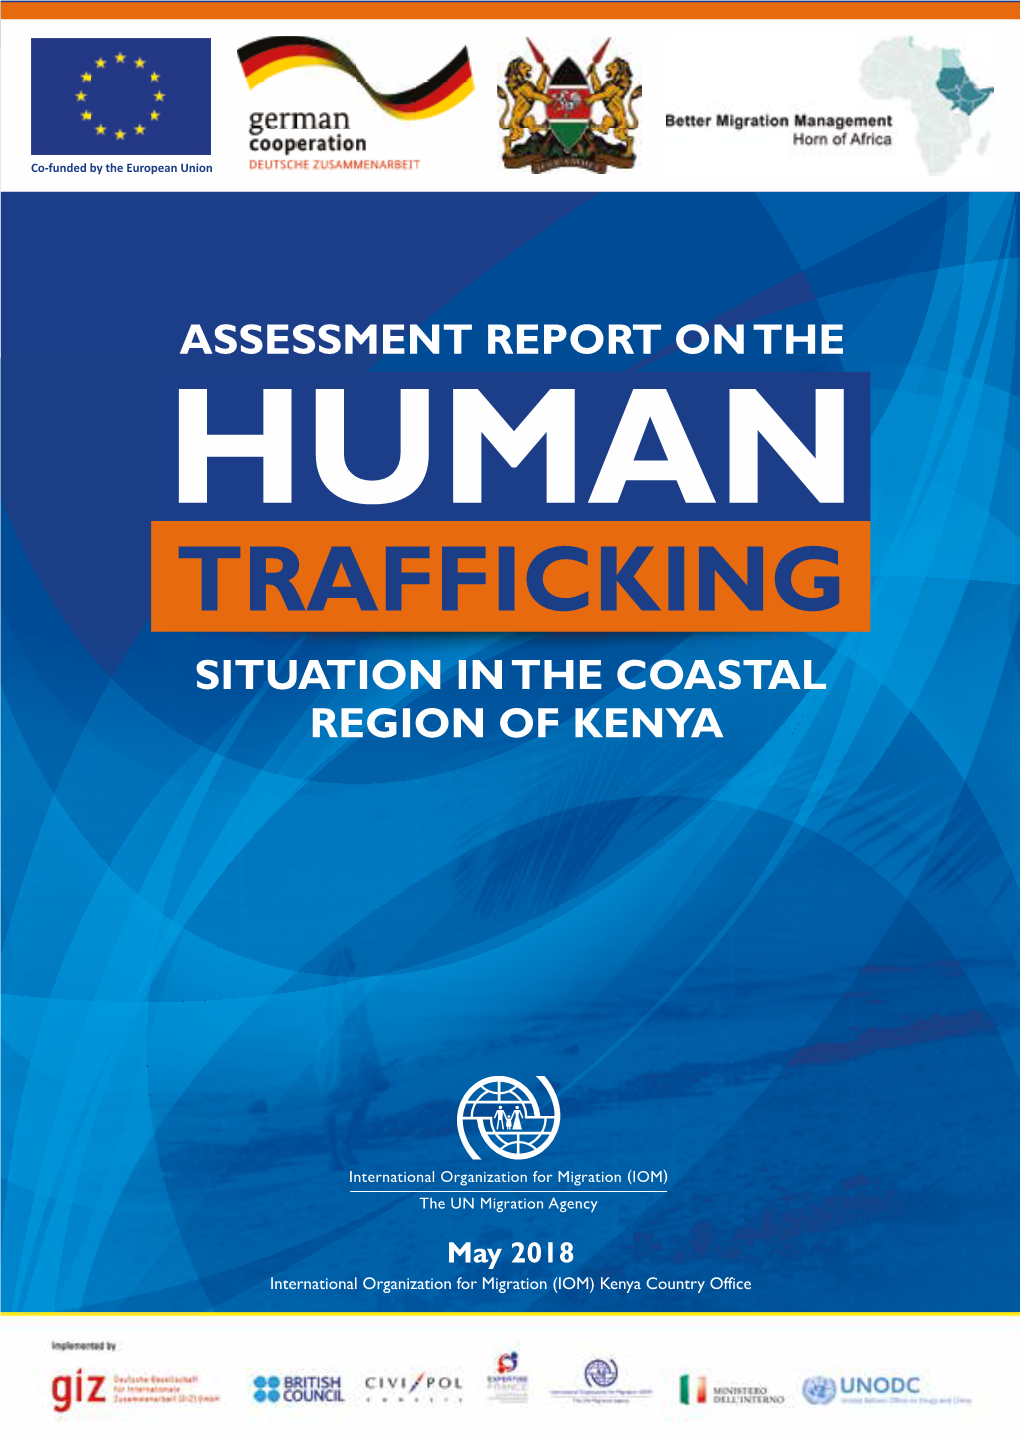 Assessment Report on the Human Trafficking Situation in the Coastal Region of Kenya